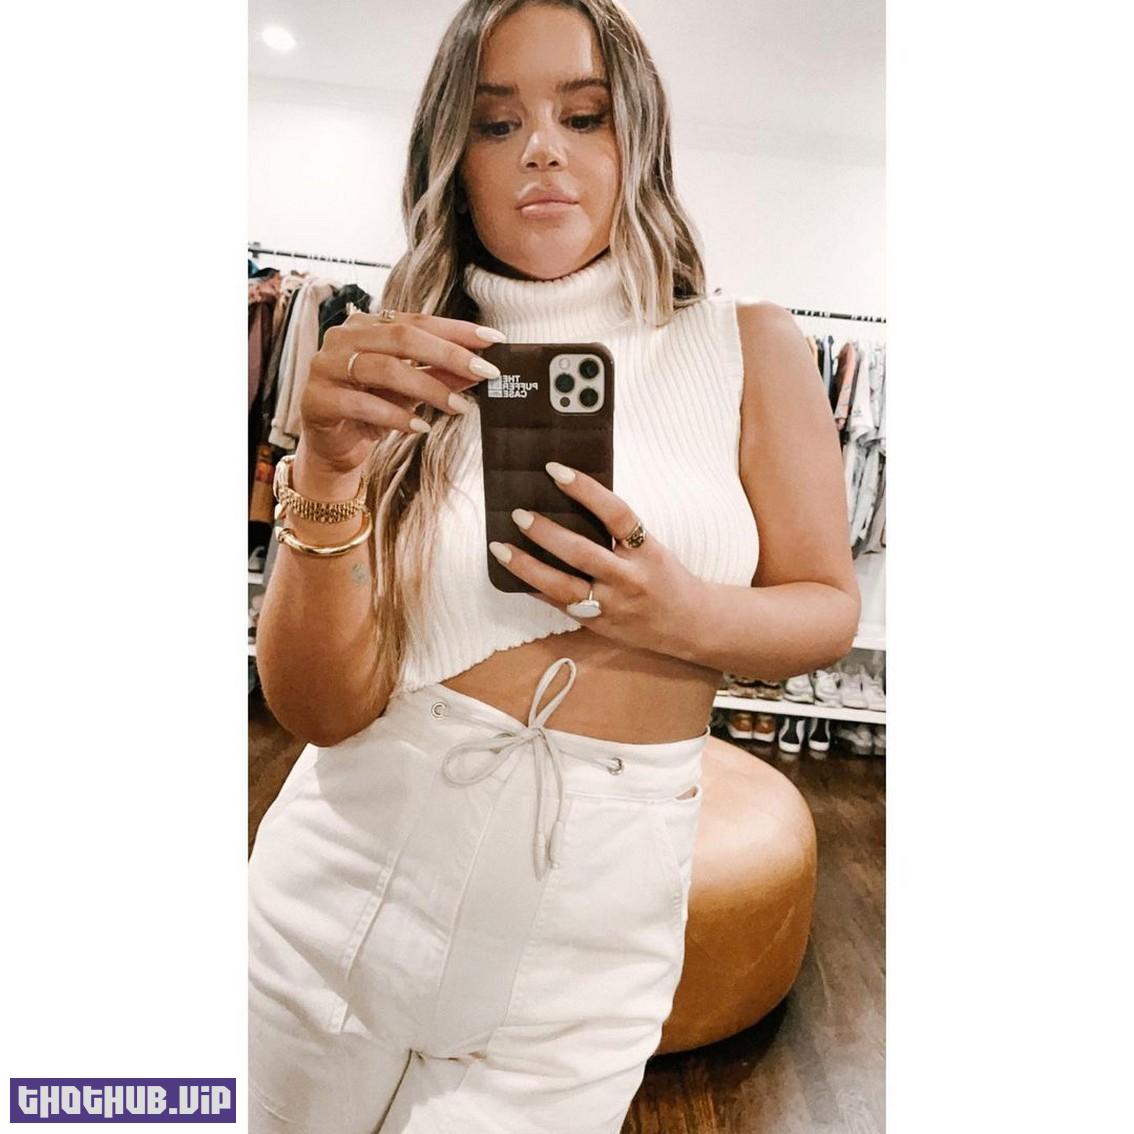 1696232917 723 Maren Morris Hottest Country Singer 54 Photos And Videos